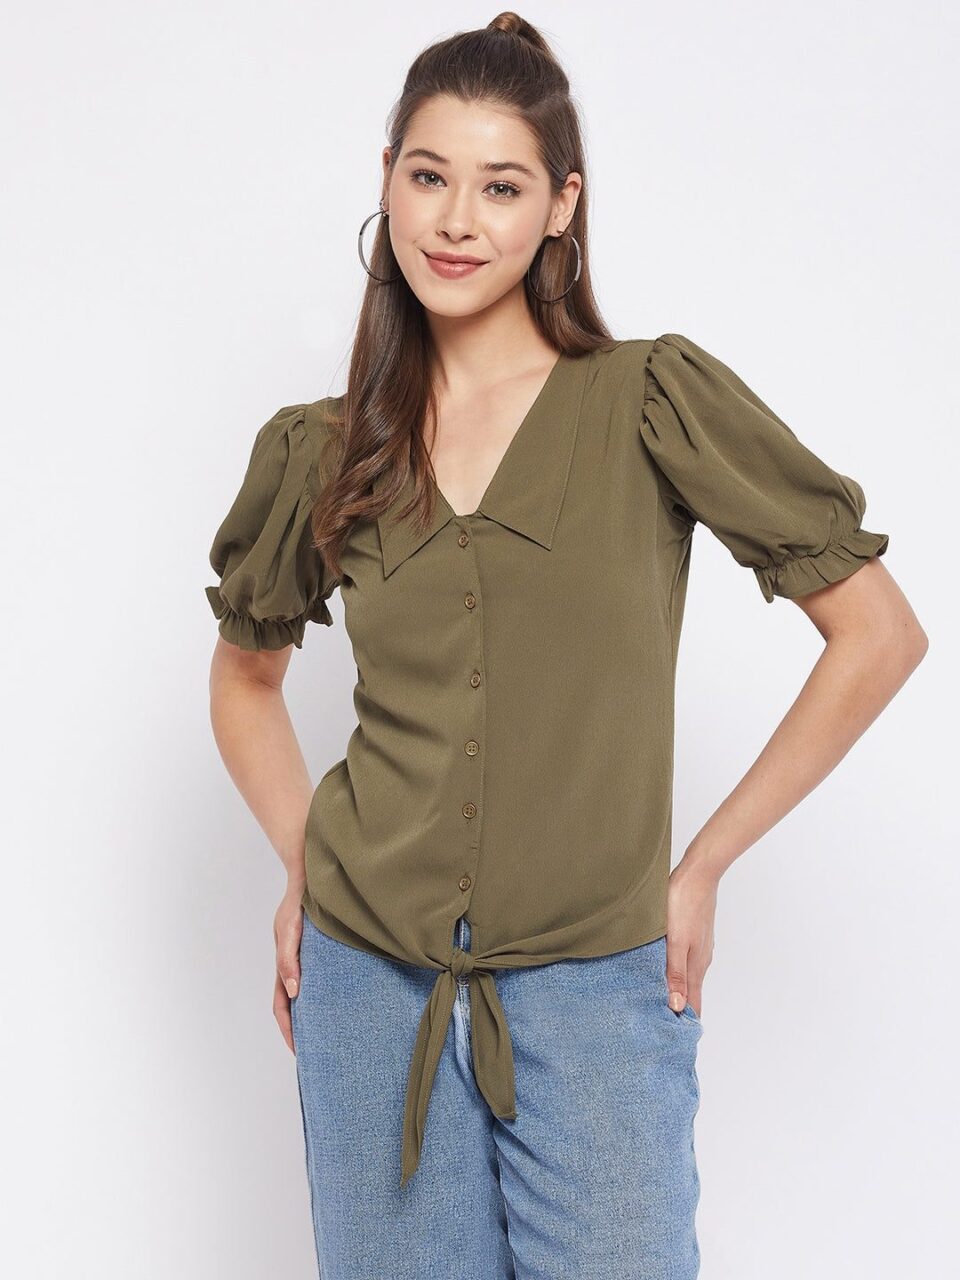 Dark Green Solid Polyester Shirt Style Top